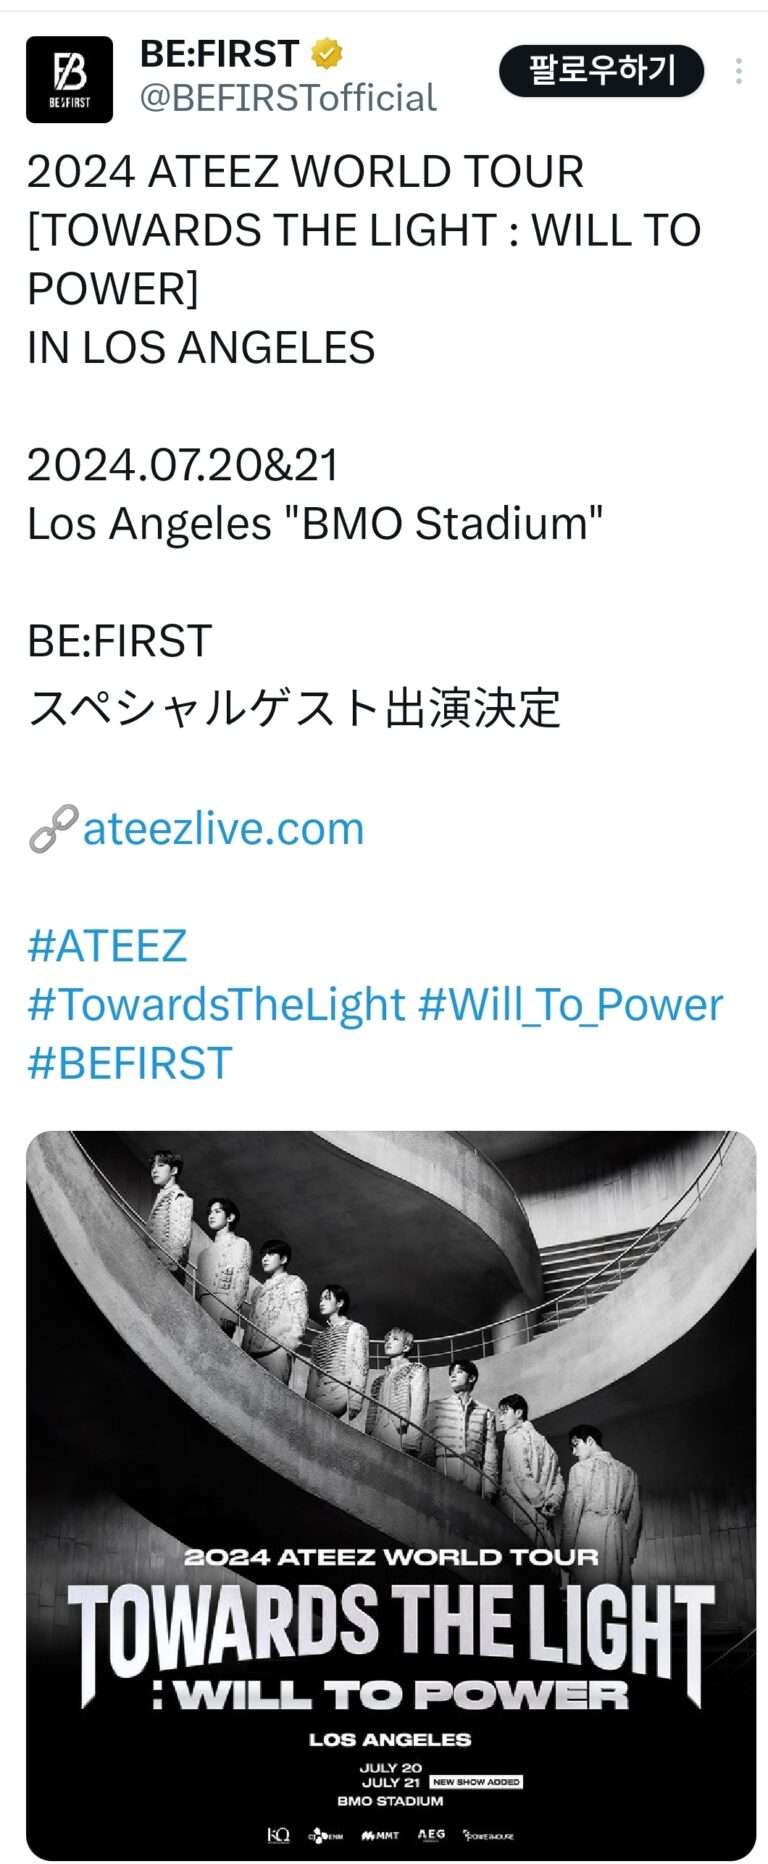 ATEEZ was criticized for inviting the Japanese boy group to their concert in North America